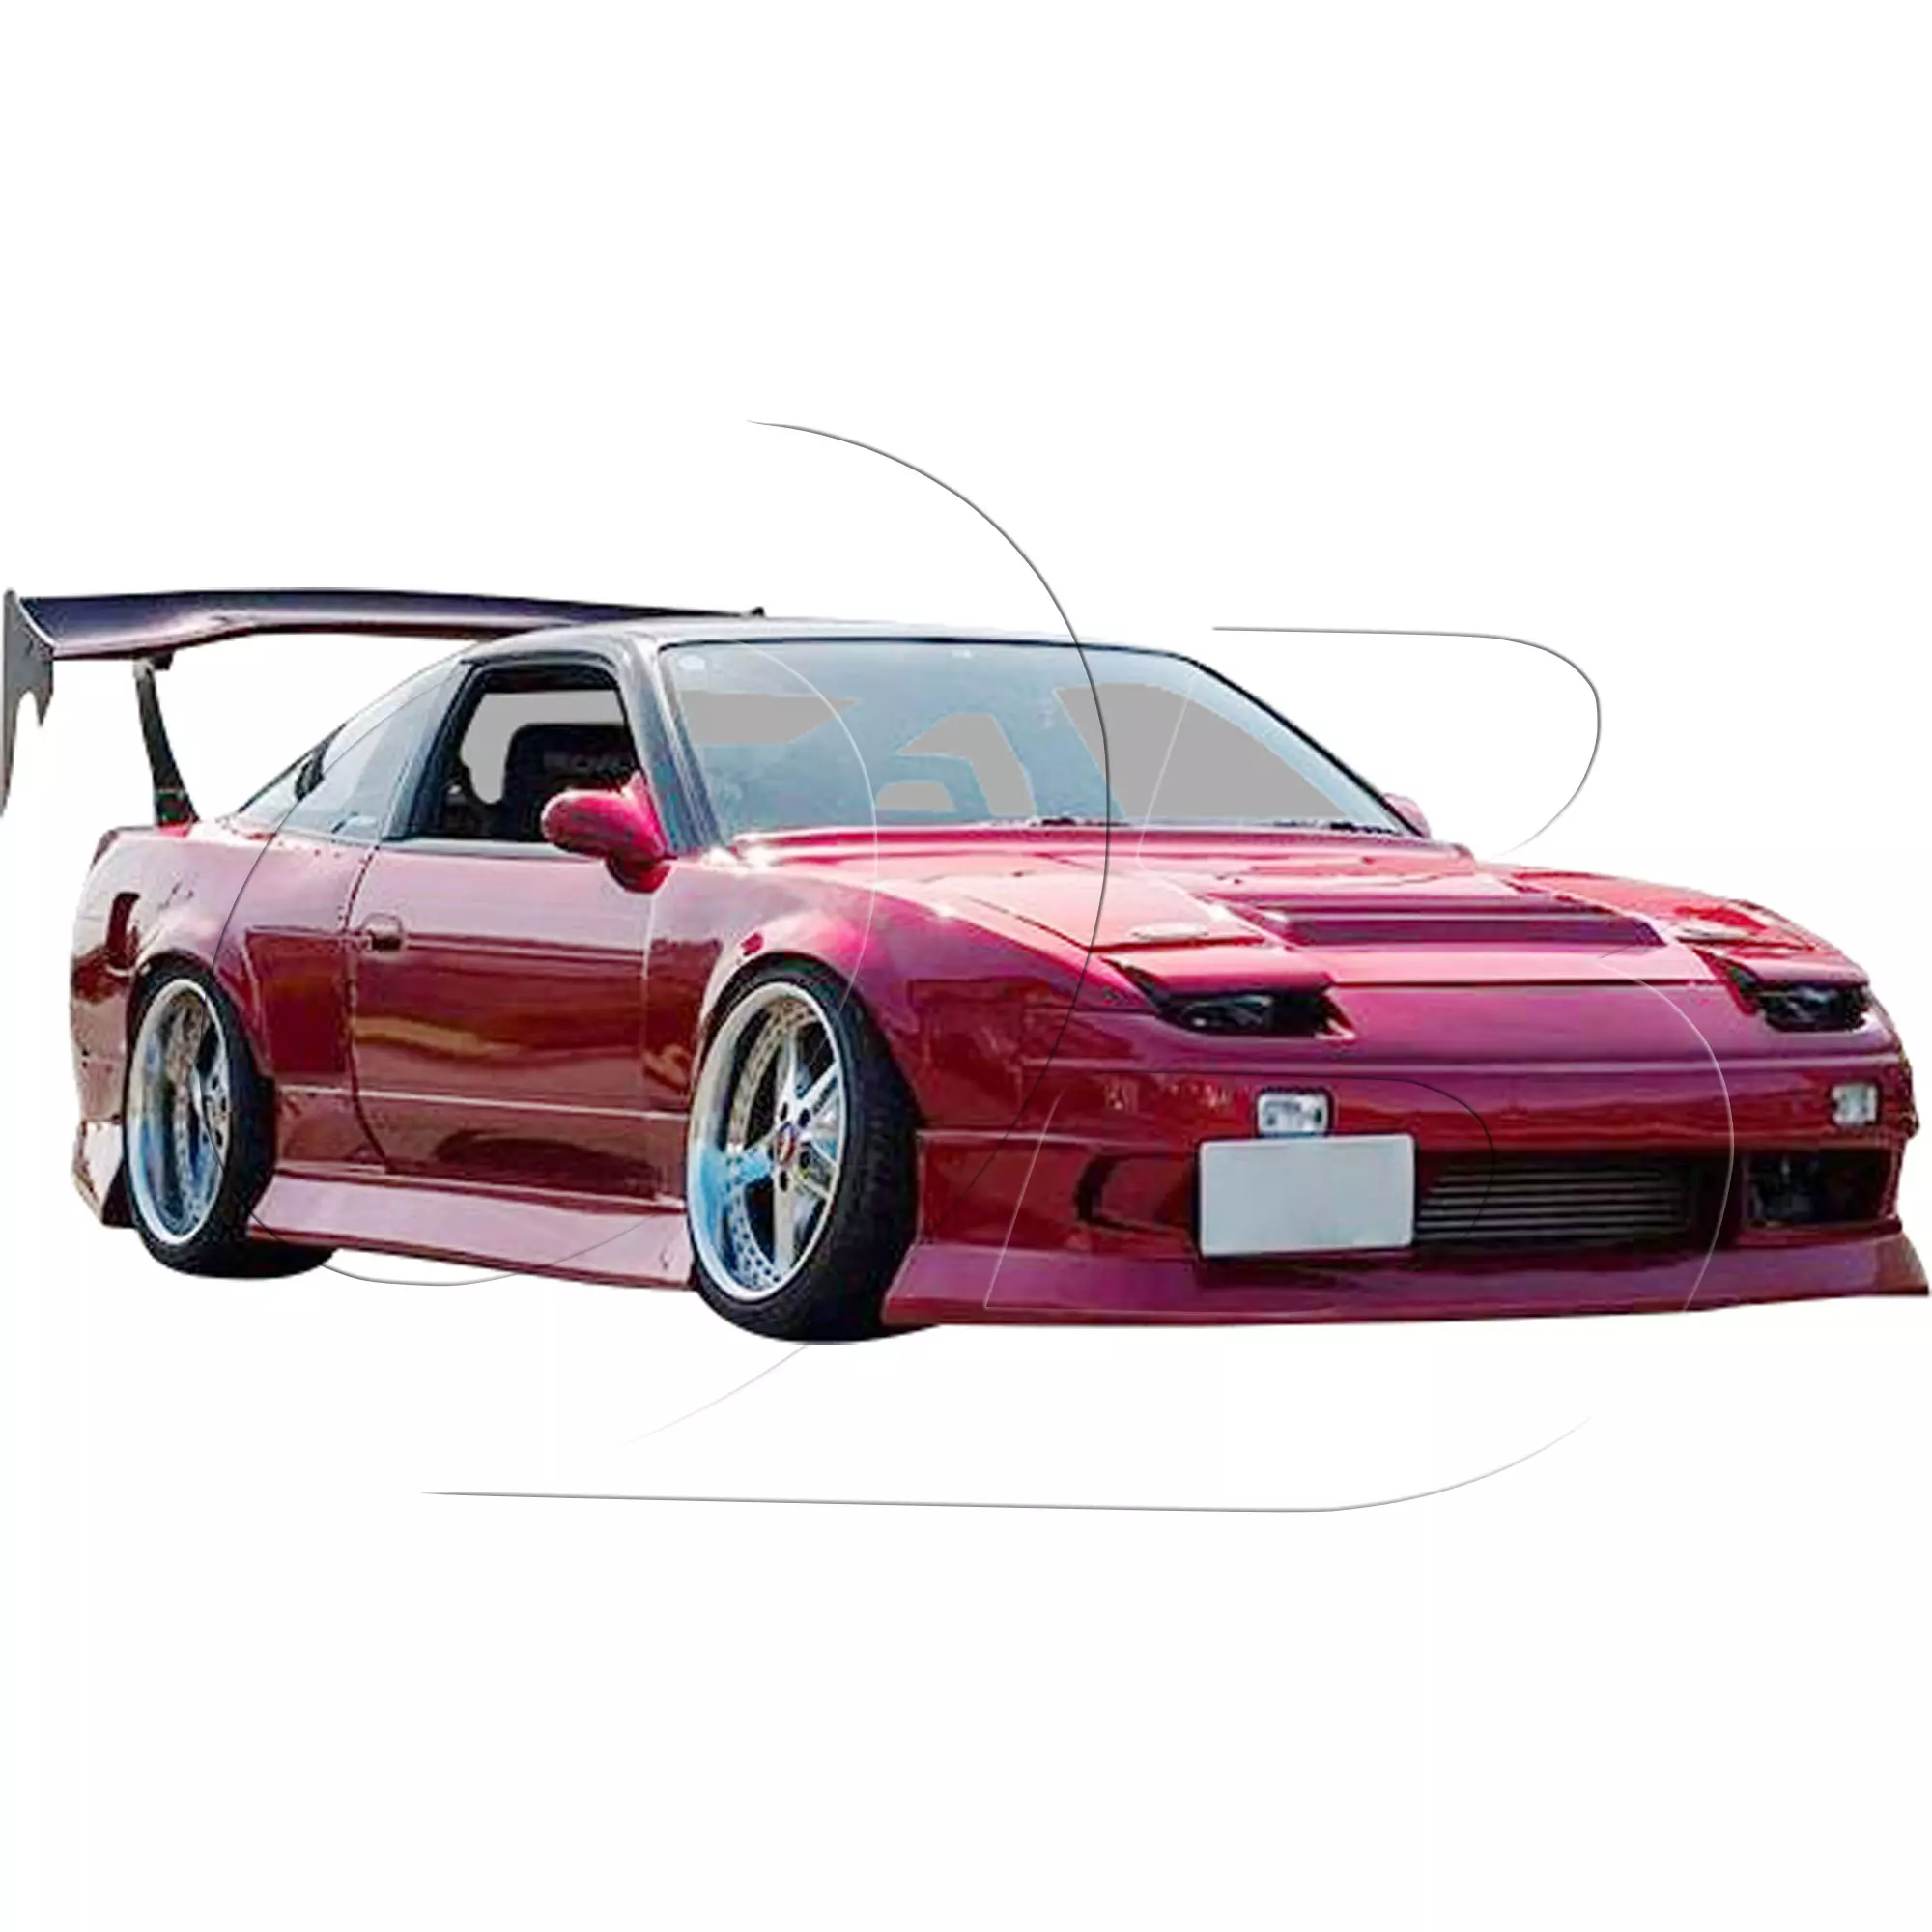 KBD Urethane Bsport2 Style 4pc Full Body Kit > Nissan 240SX 1989-1994 > 2dr Coupe - Image 59